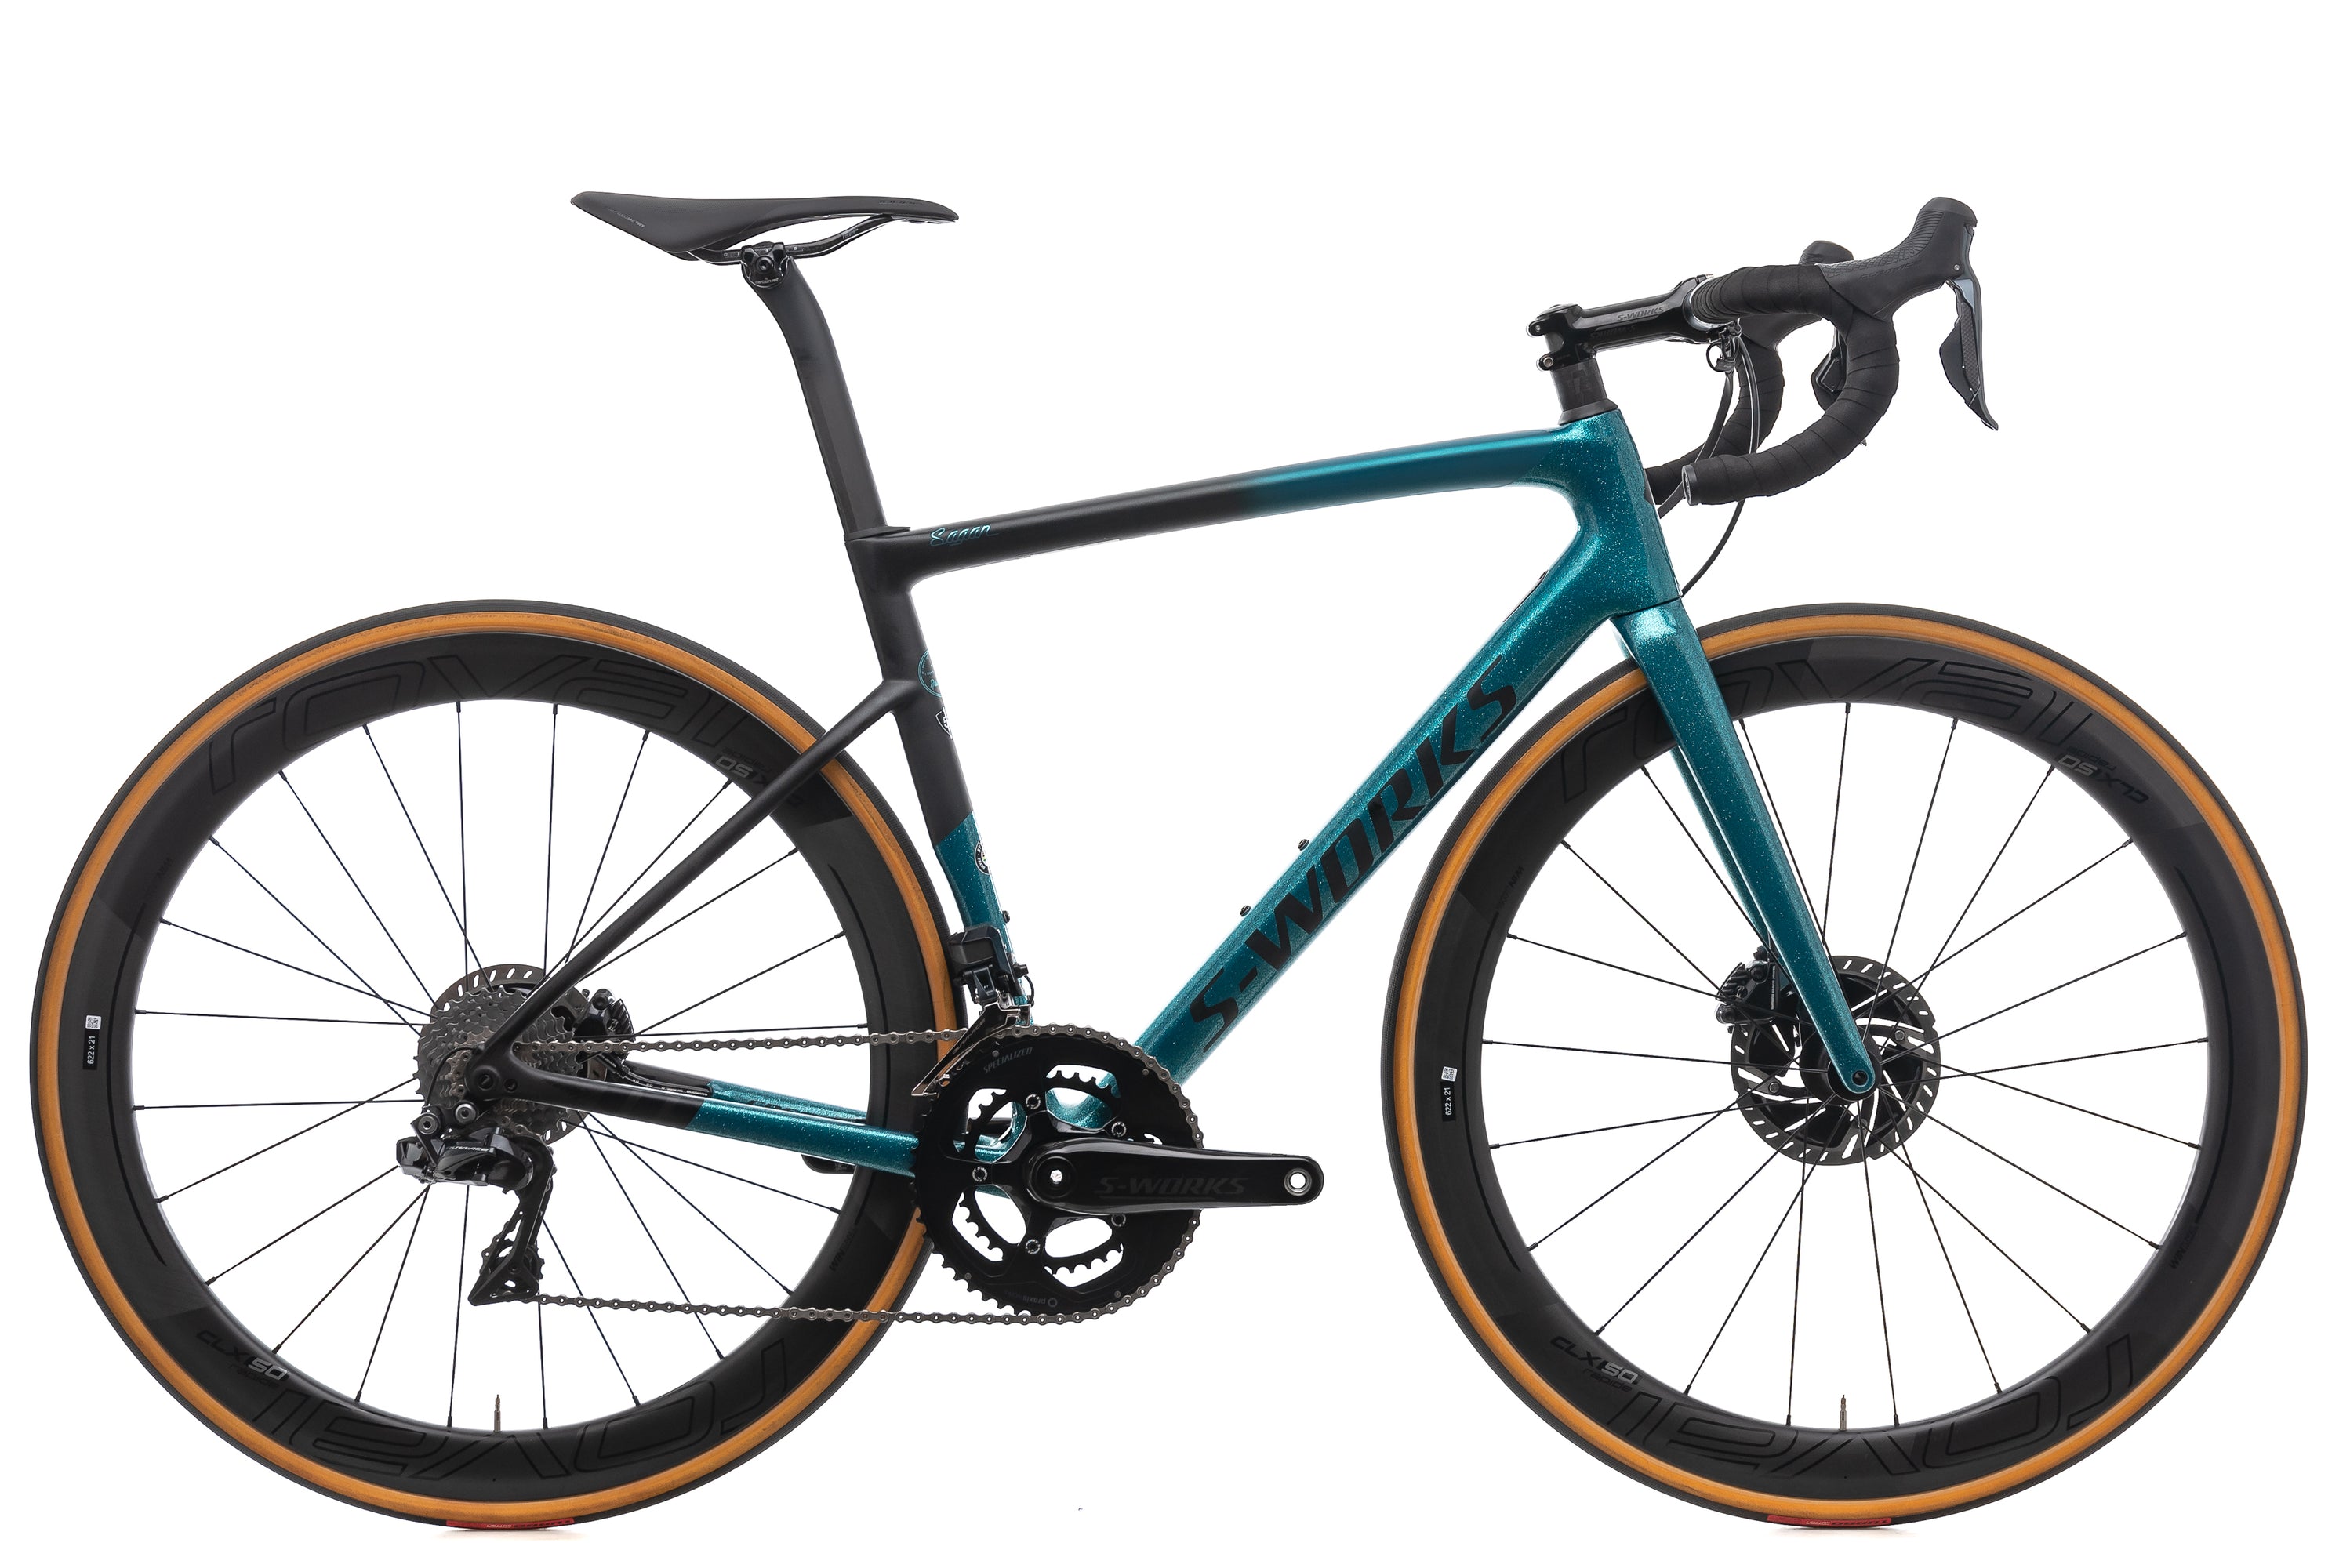 text_set_value: Specialized S-Works Tarmac Disc – Sagan Collection